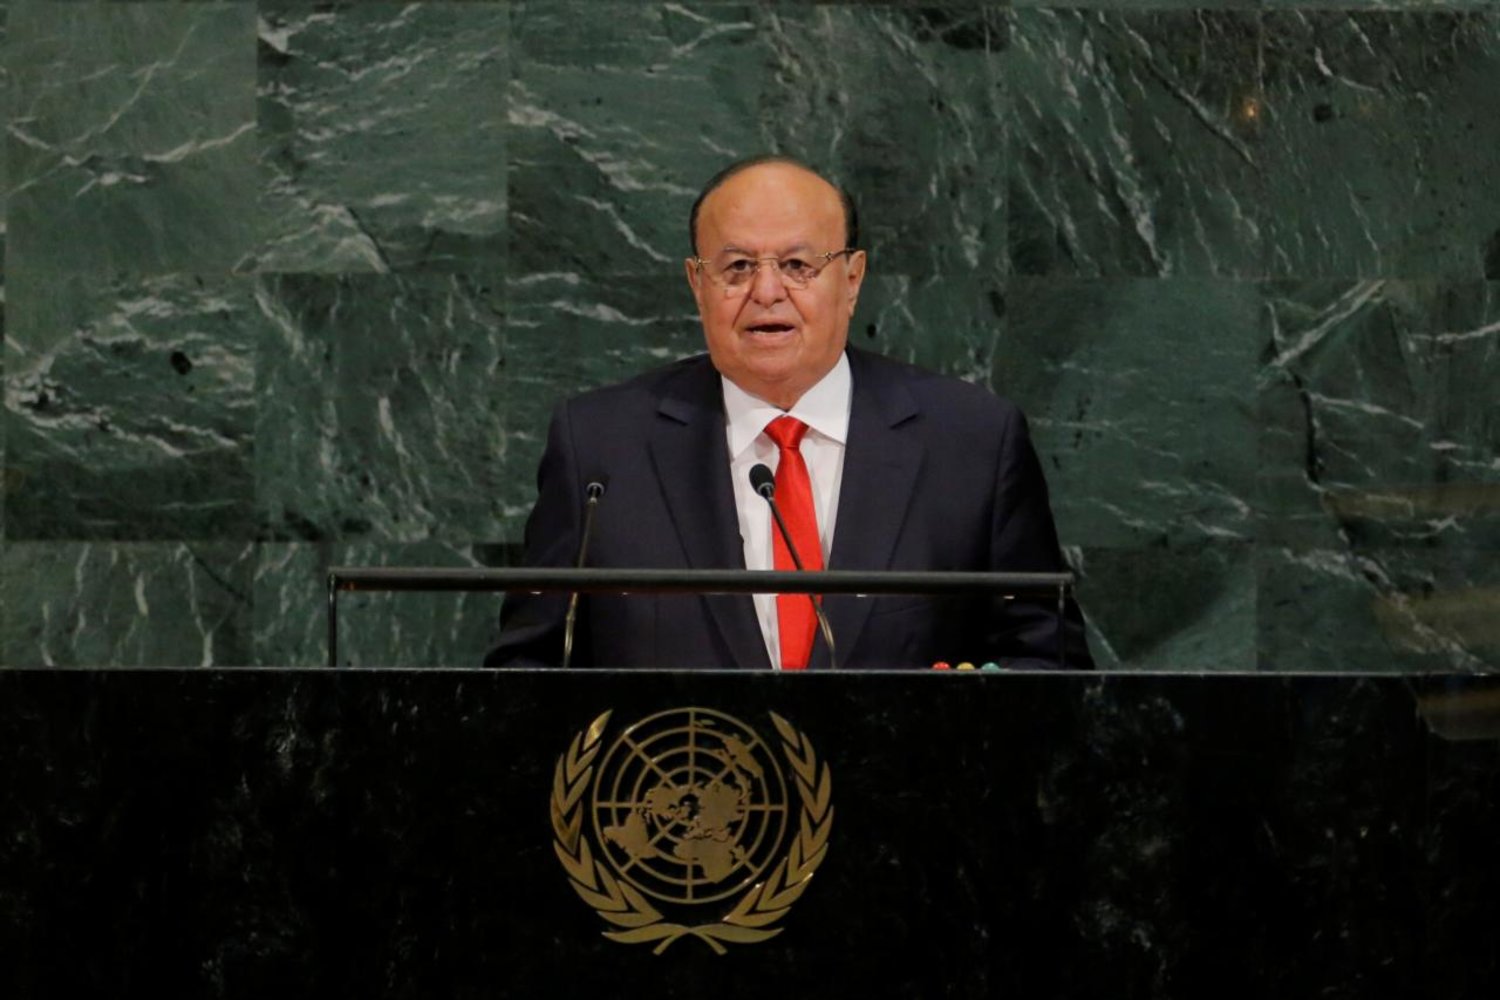 Abdrabbuh Mansour Hadi Mansour, President of the Republic of Yemen, addresses the 72nd United Nations General Assembly at UN headquarters in New York, US, September 21, 2017. REUTERS/Lucas Jackson